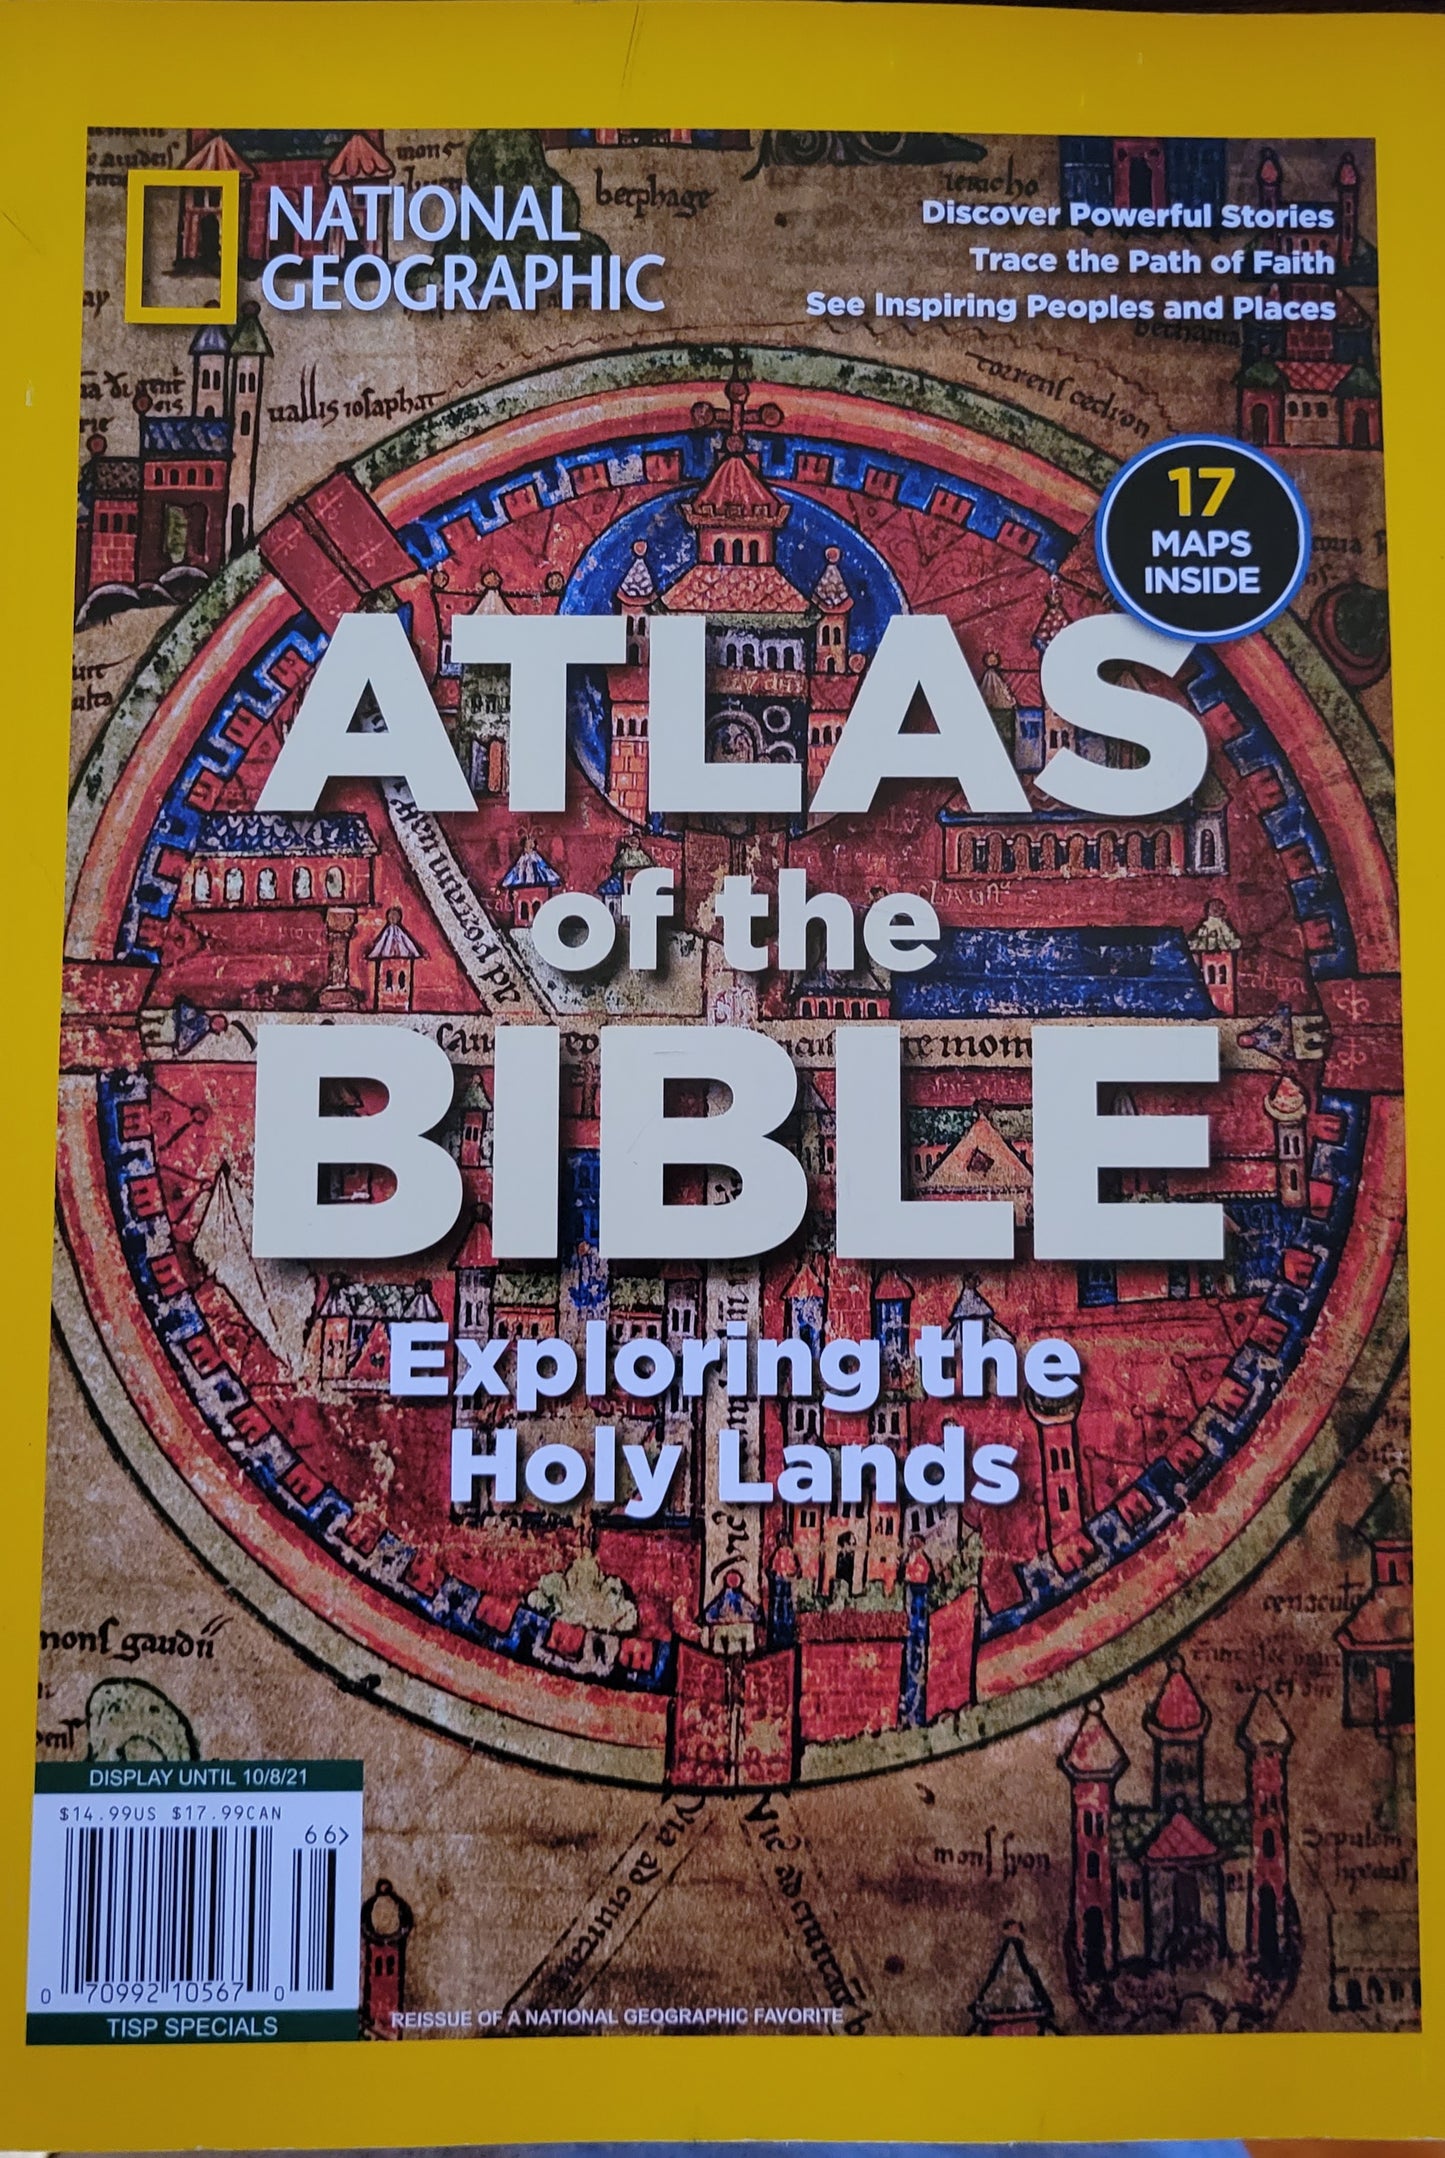 National Geographic special edition "Atlas of the Bible: Exploring Holy Lands", with 17 maps. Front view.